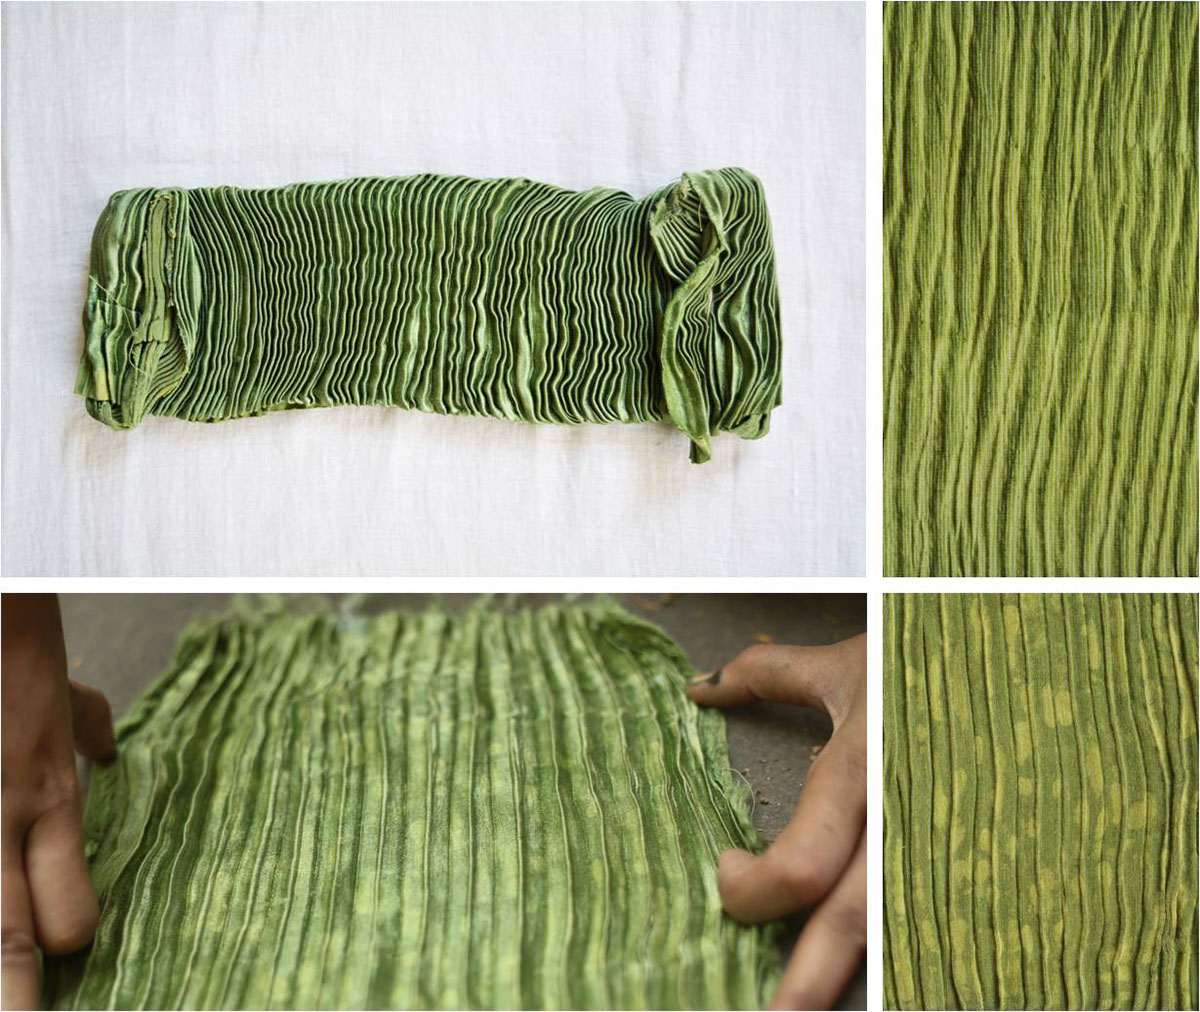 banana fabric construction surface techniques Handstitching organic idli wrappings TEXTILE TEXTURES surface texture SURFACE TECHNIQUE